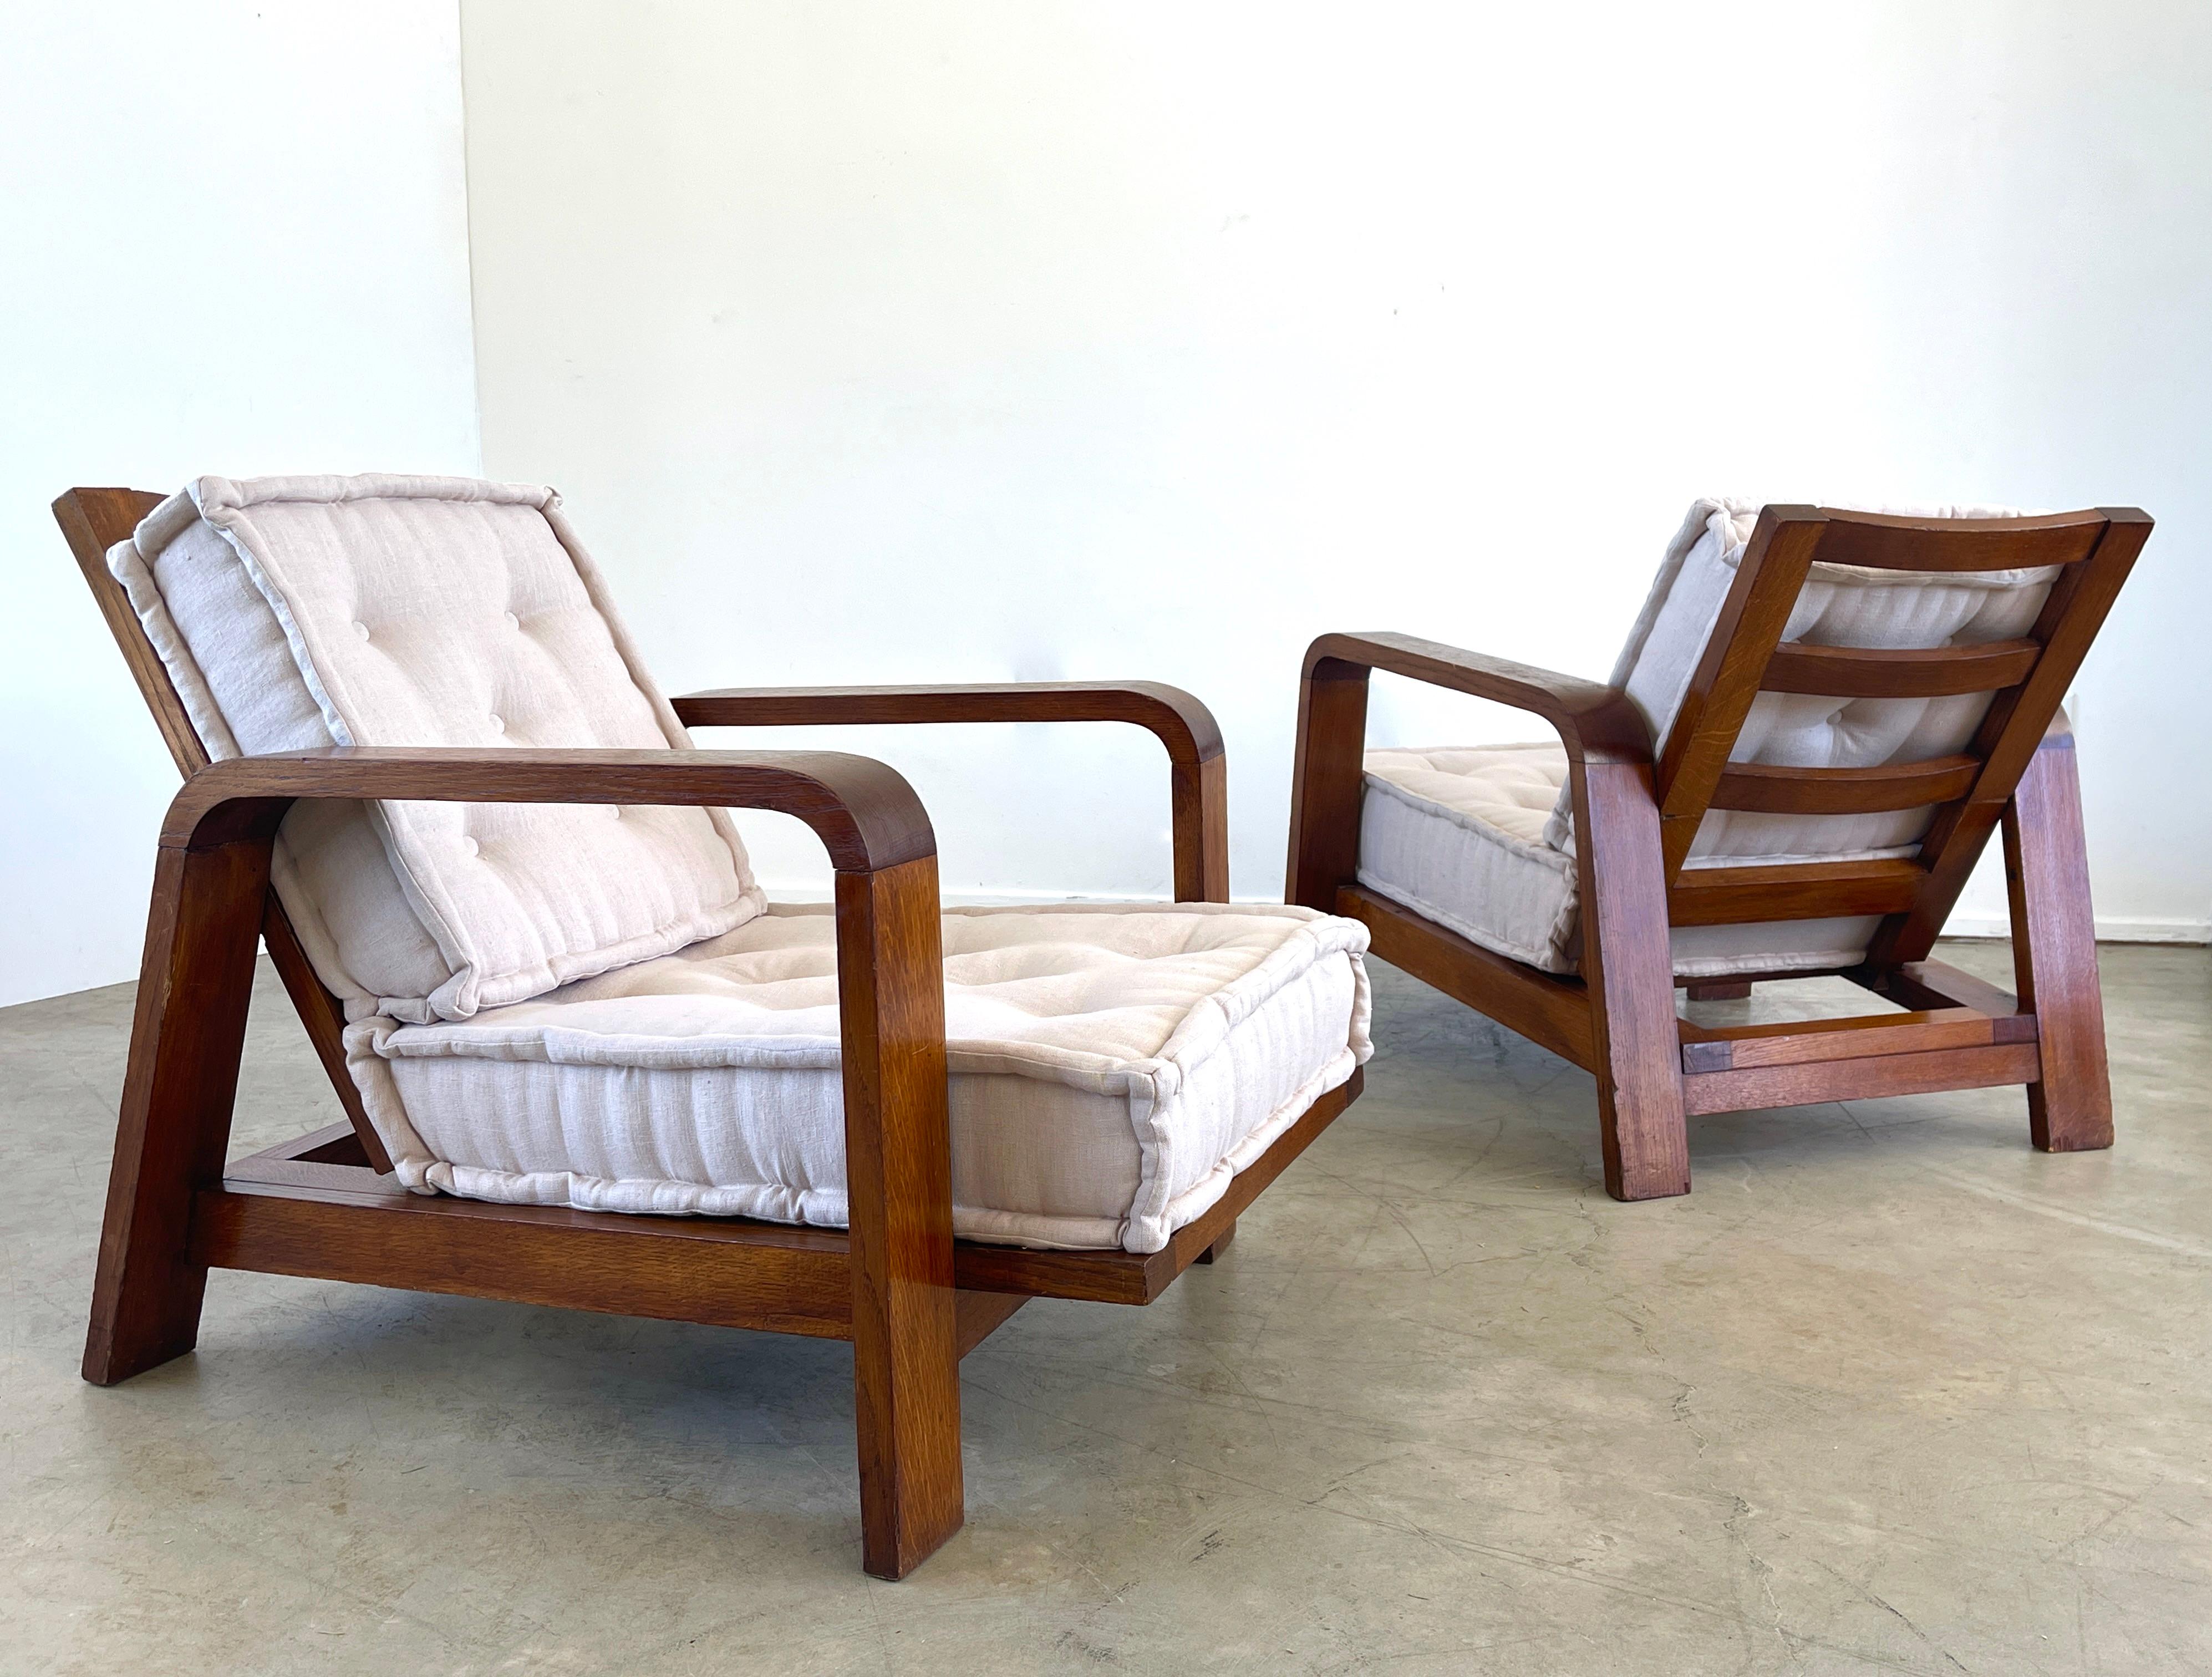 Wonderful pair of French oak chairs attributed to Rene Gabriel
Newly upholstered linen seat cushions with French seams 
Great wood patina and simple lines.